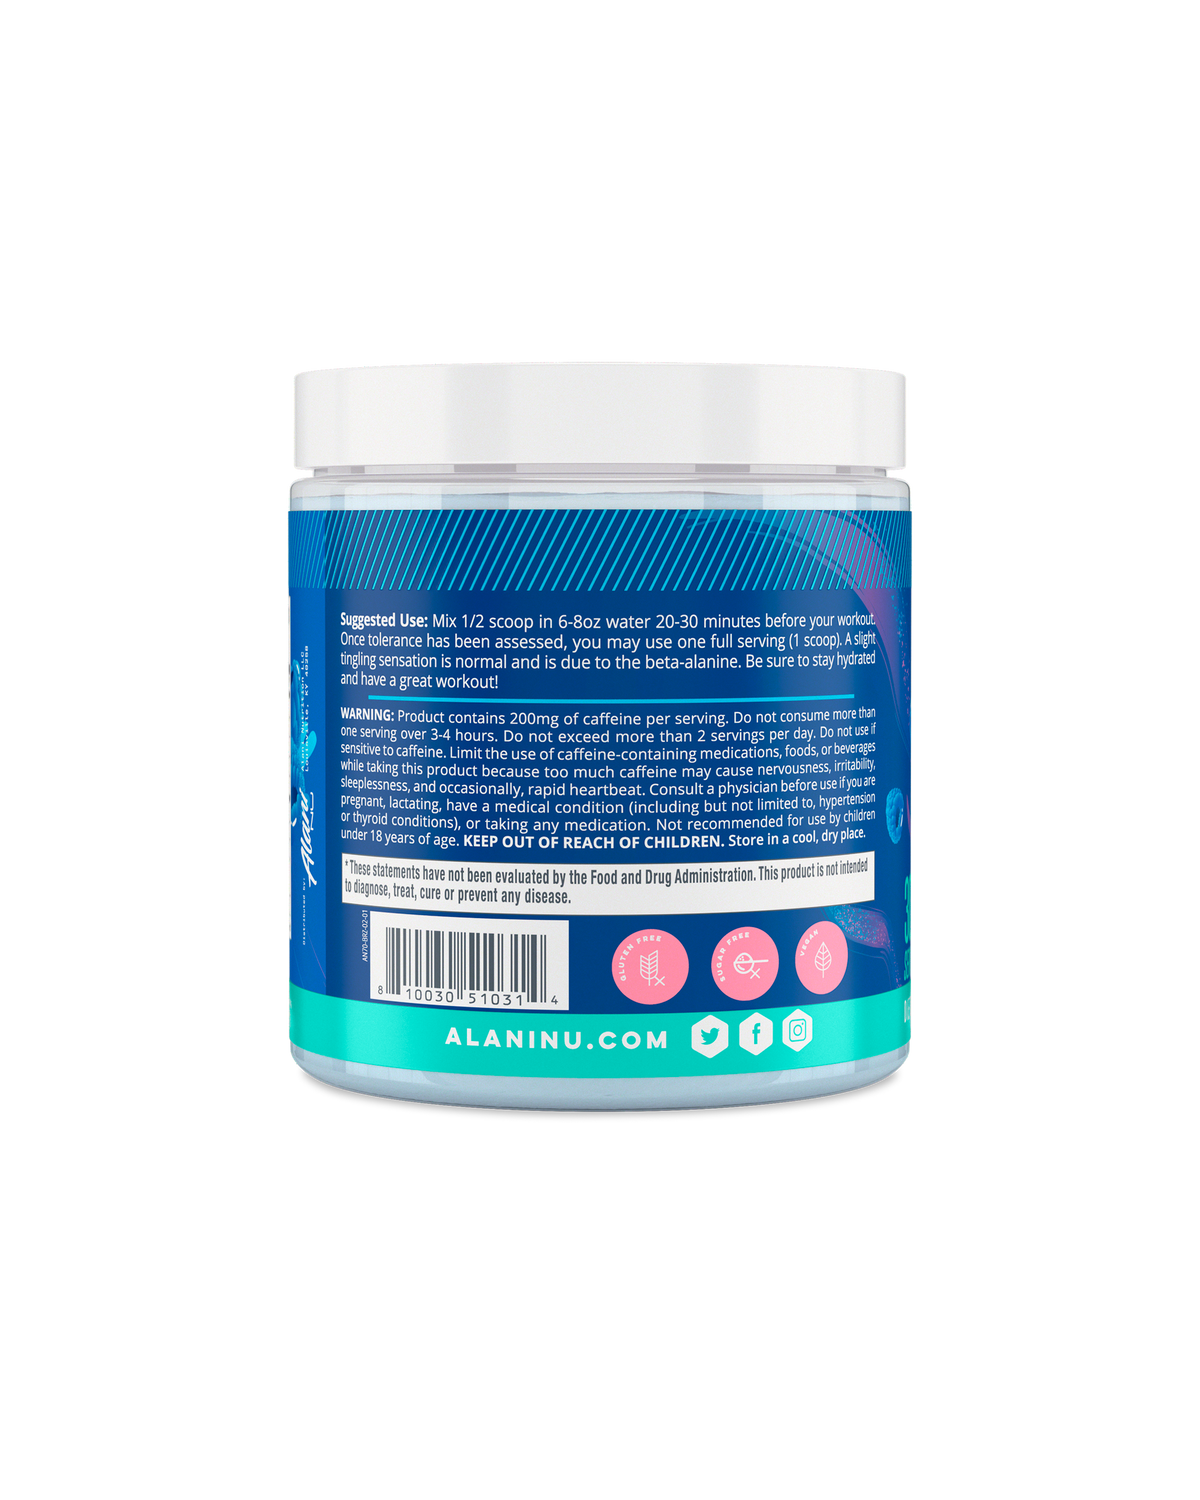 A side view of Pre-workout in Breezeberry flavor showcasing suggested use of product.